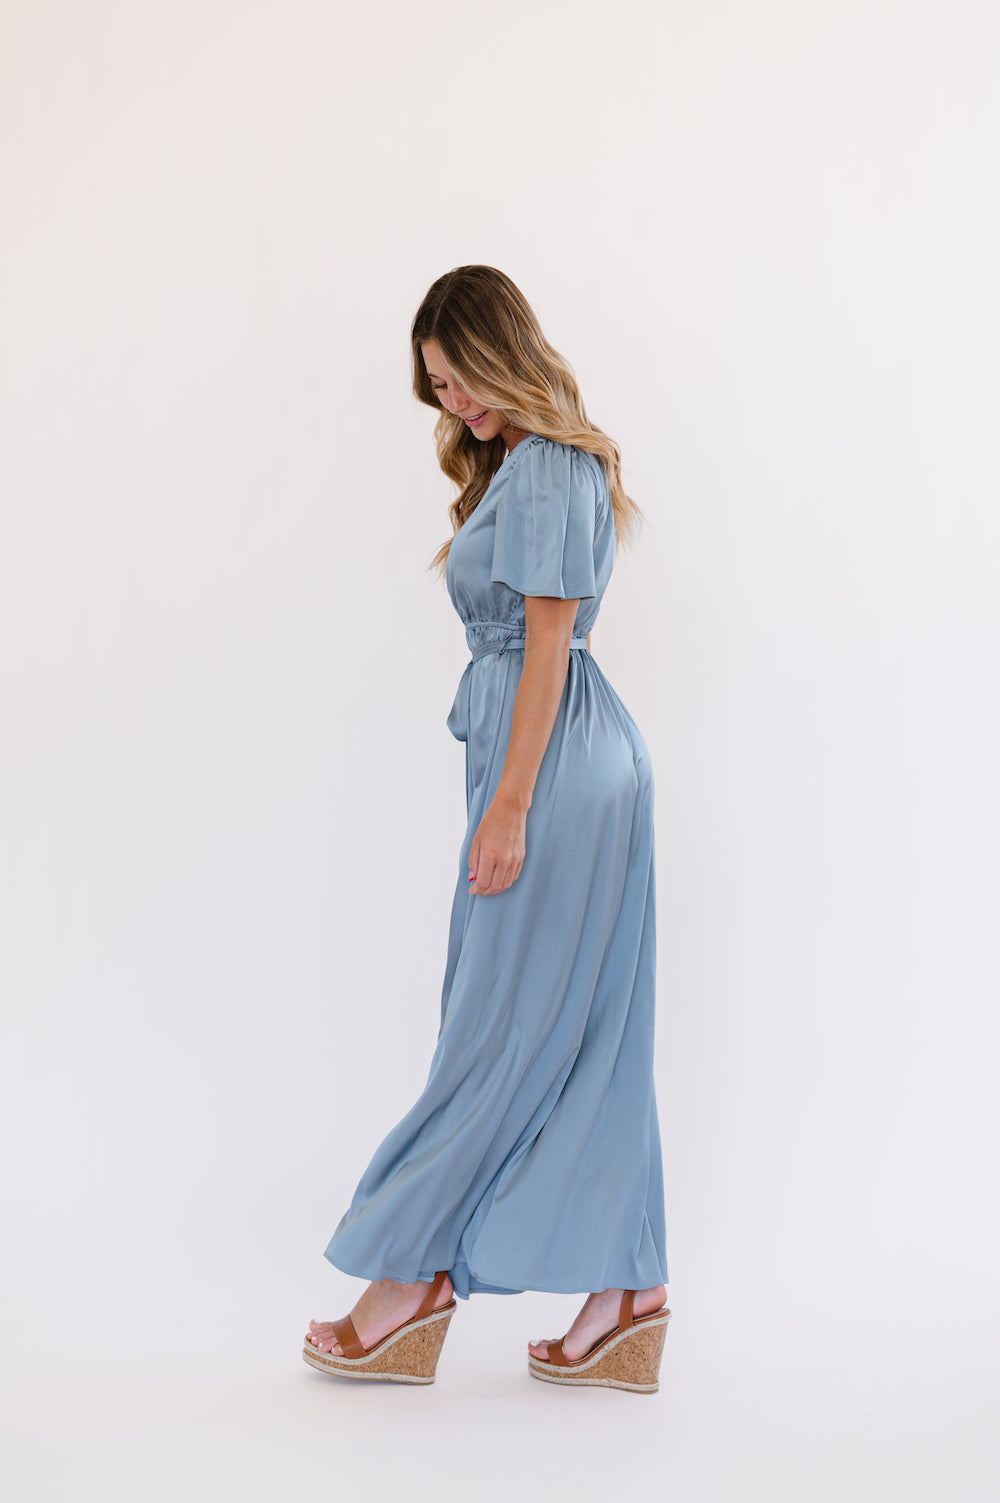 Dusty blue maxi dress with tie at waist